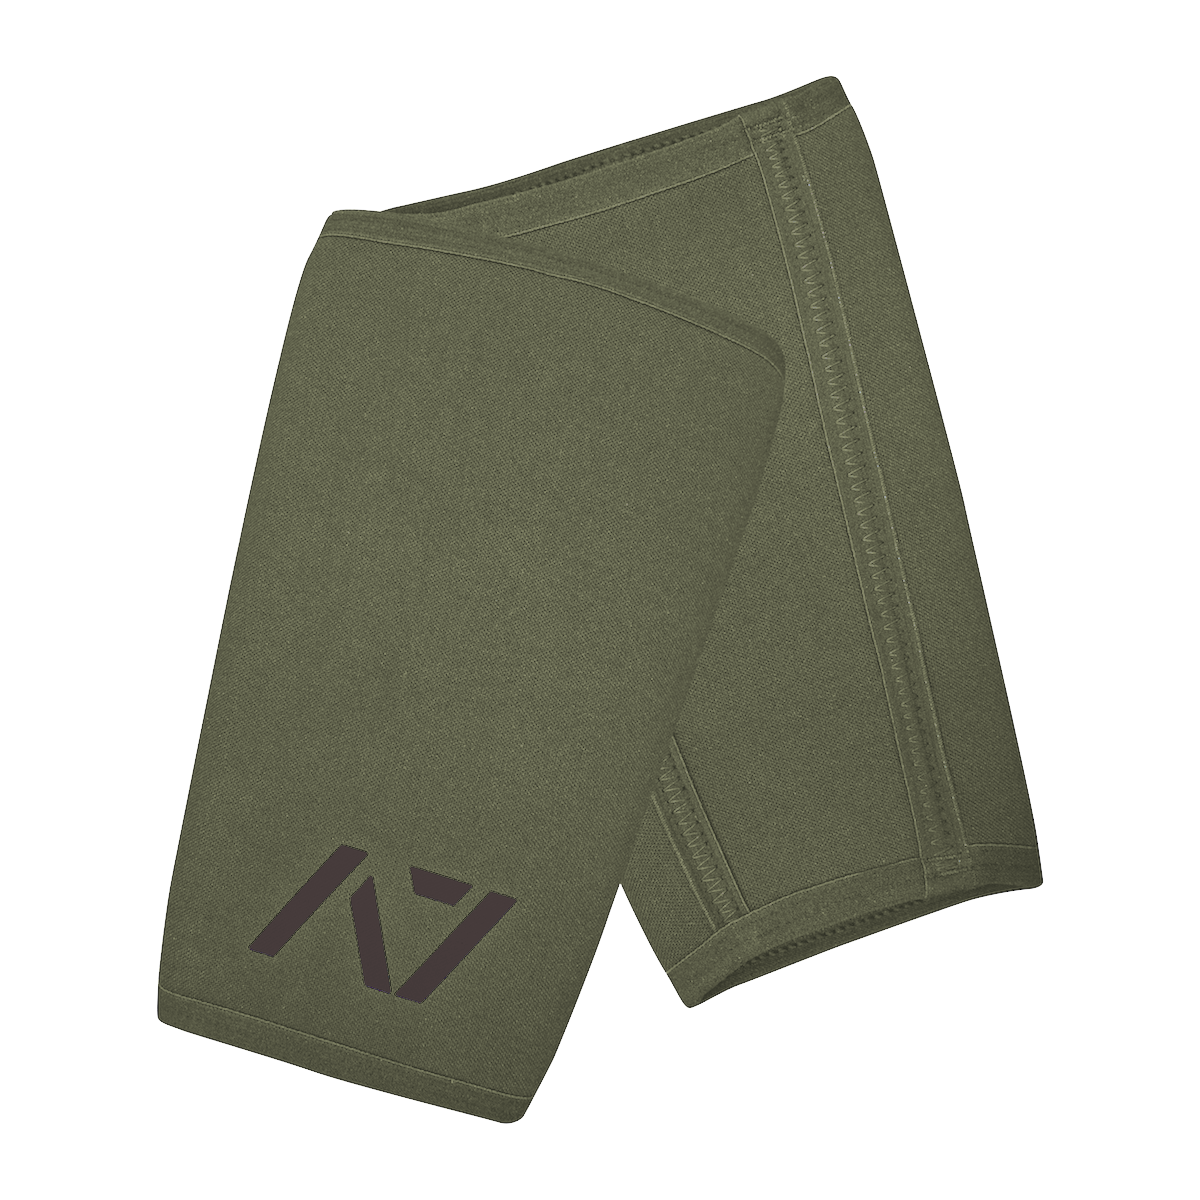 A7 IPF approved Military CONE knee sleeves are structured with a downward cut panel on the back of the quad and calf to ensure ultimate compression at the knee joint. A7 CONE knee sleeves are IPF approved for use in all powerlifting competitions. A7 CONE Knee Sleeves are IPF Approved Kit. A7 cone knee sleeves are made with high quality neoprene and the knee sleeves are sold as a pair. The double seam on the knee sleeves create a greater tension on the knee joint. A7 UK shipping to UK and Europe. 